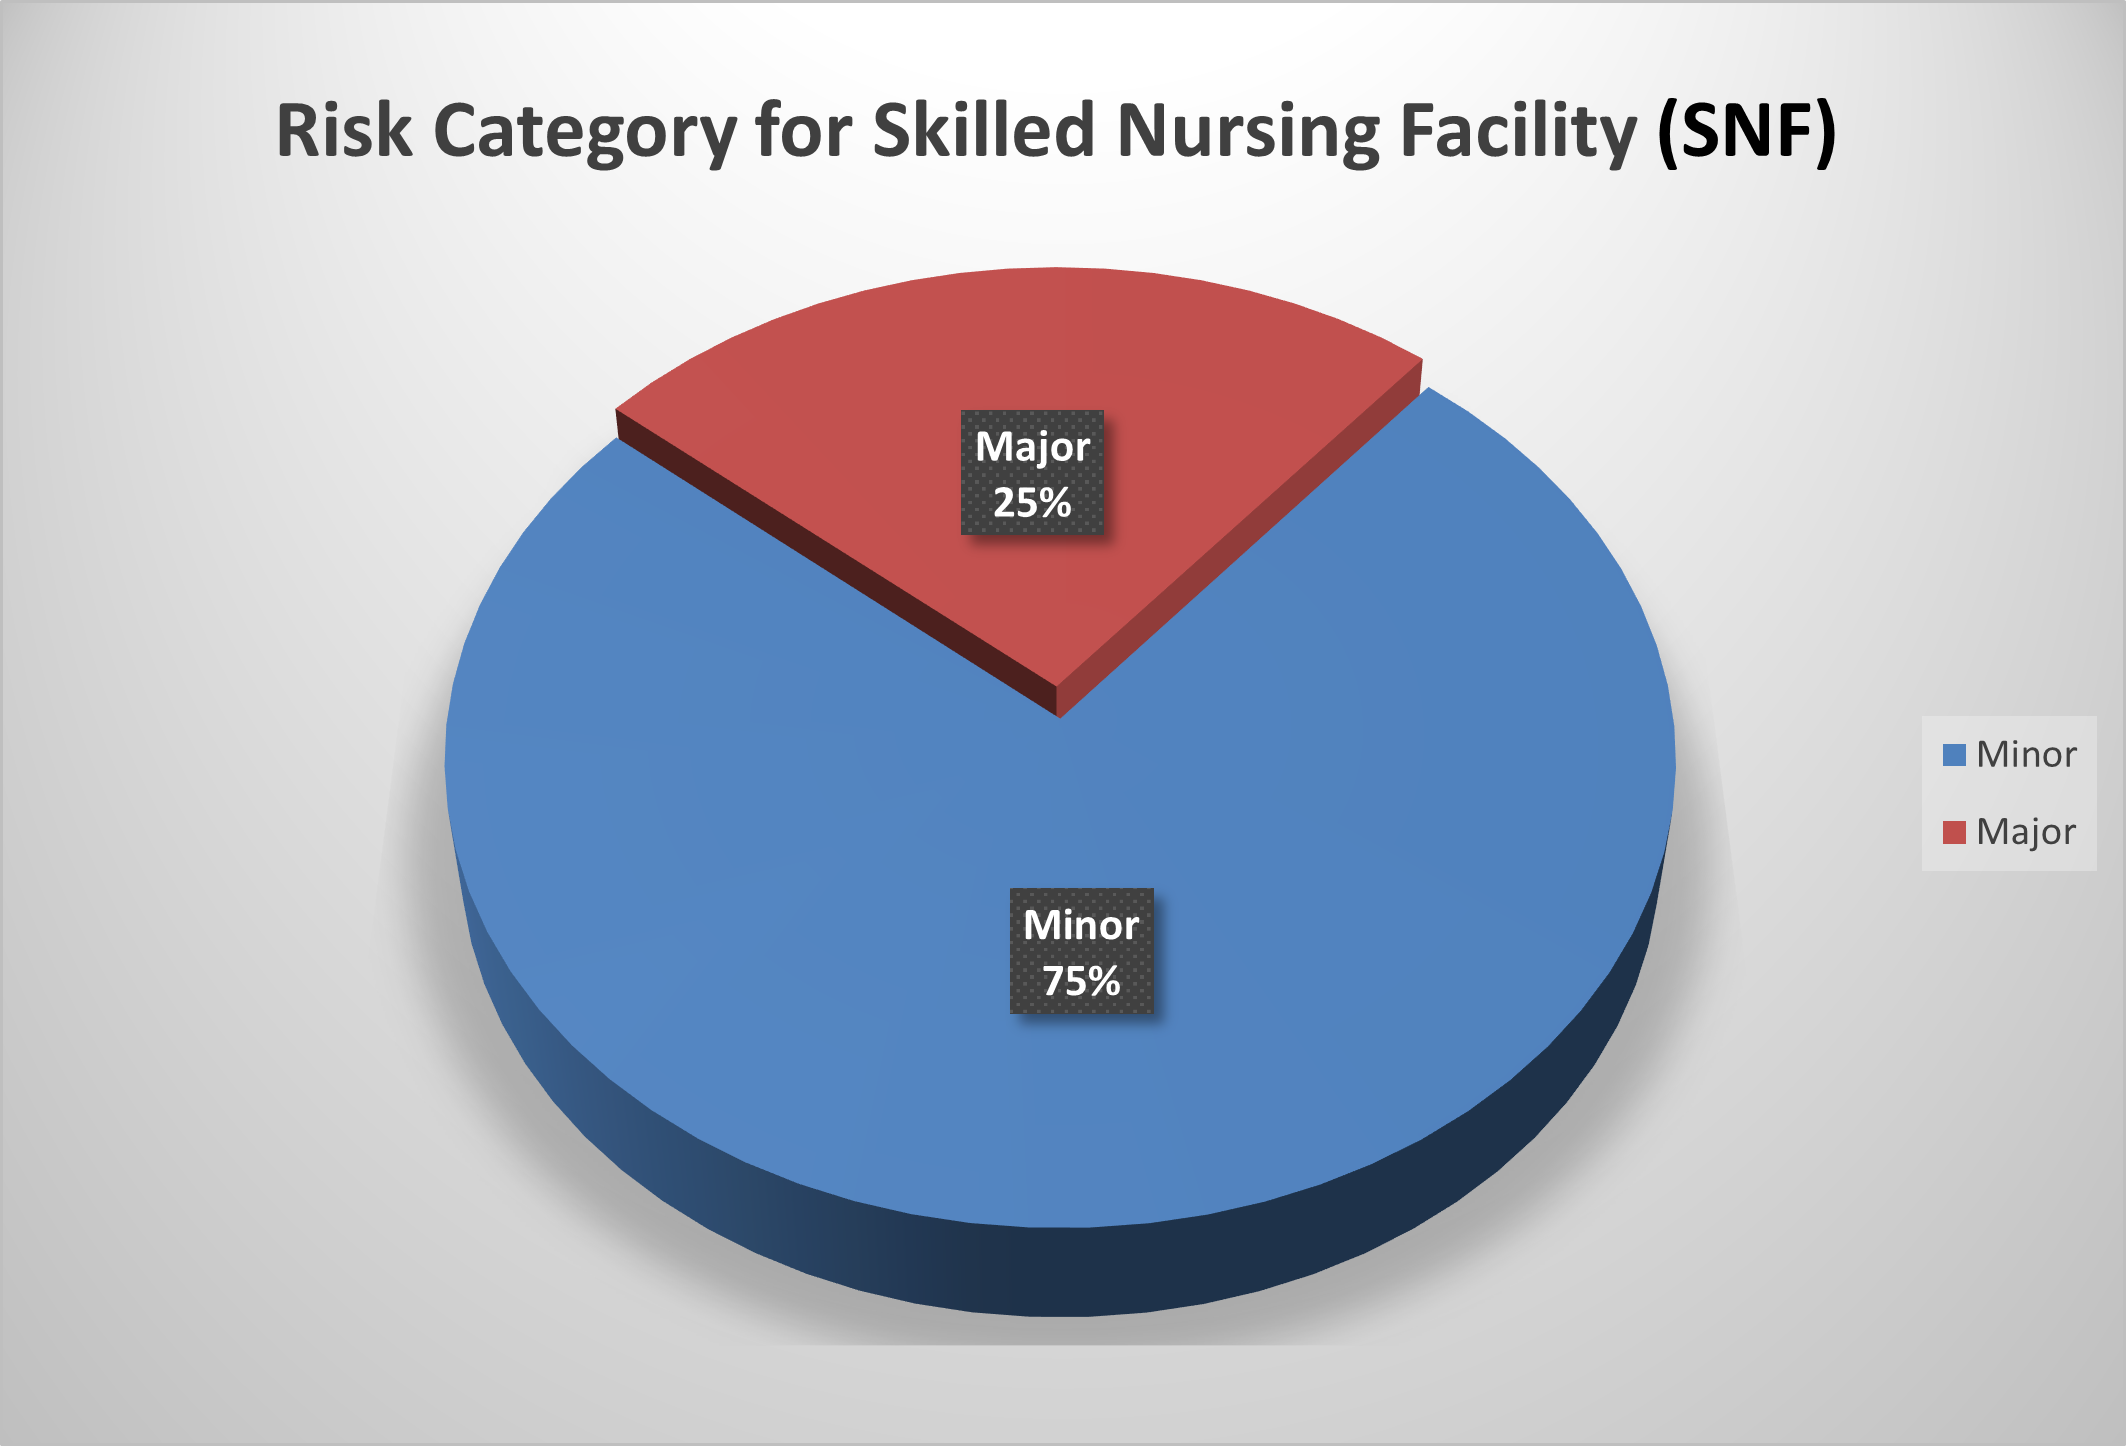 The categories for Skilled Nursing Facility are defined.